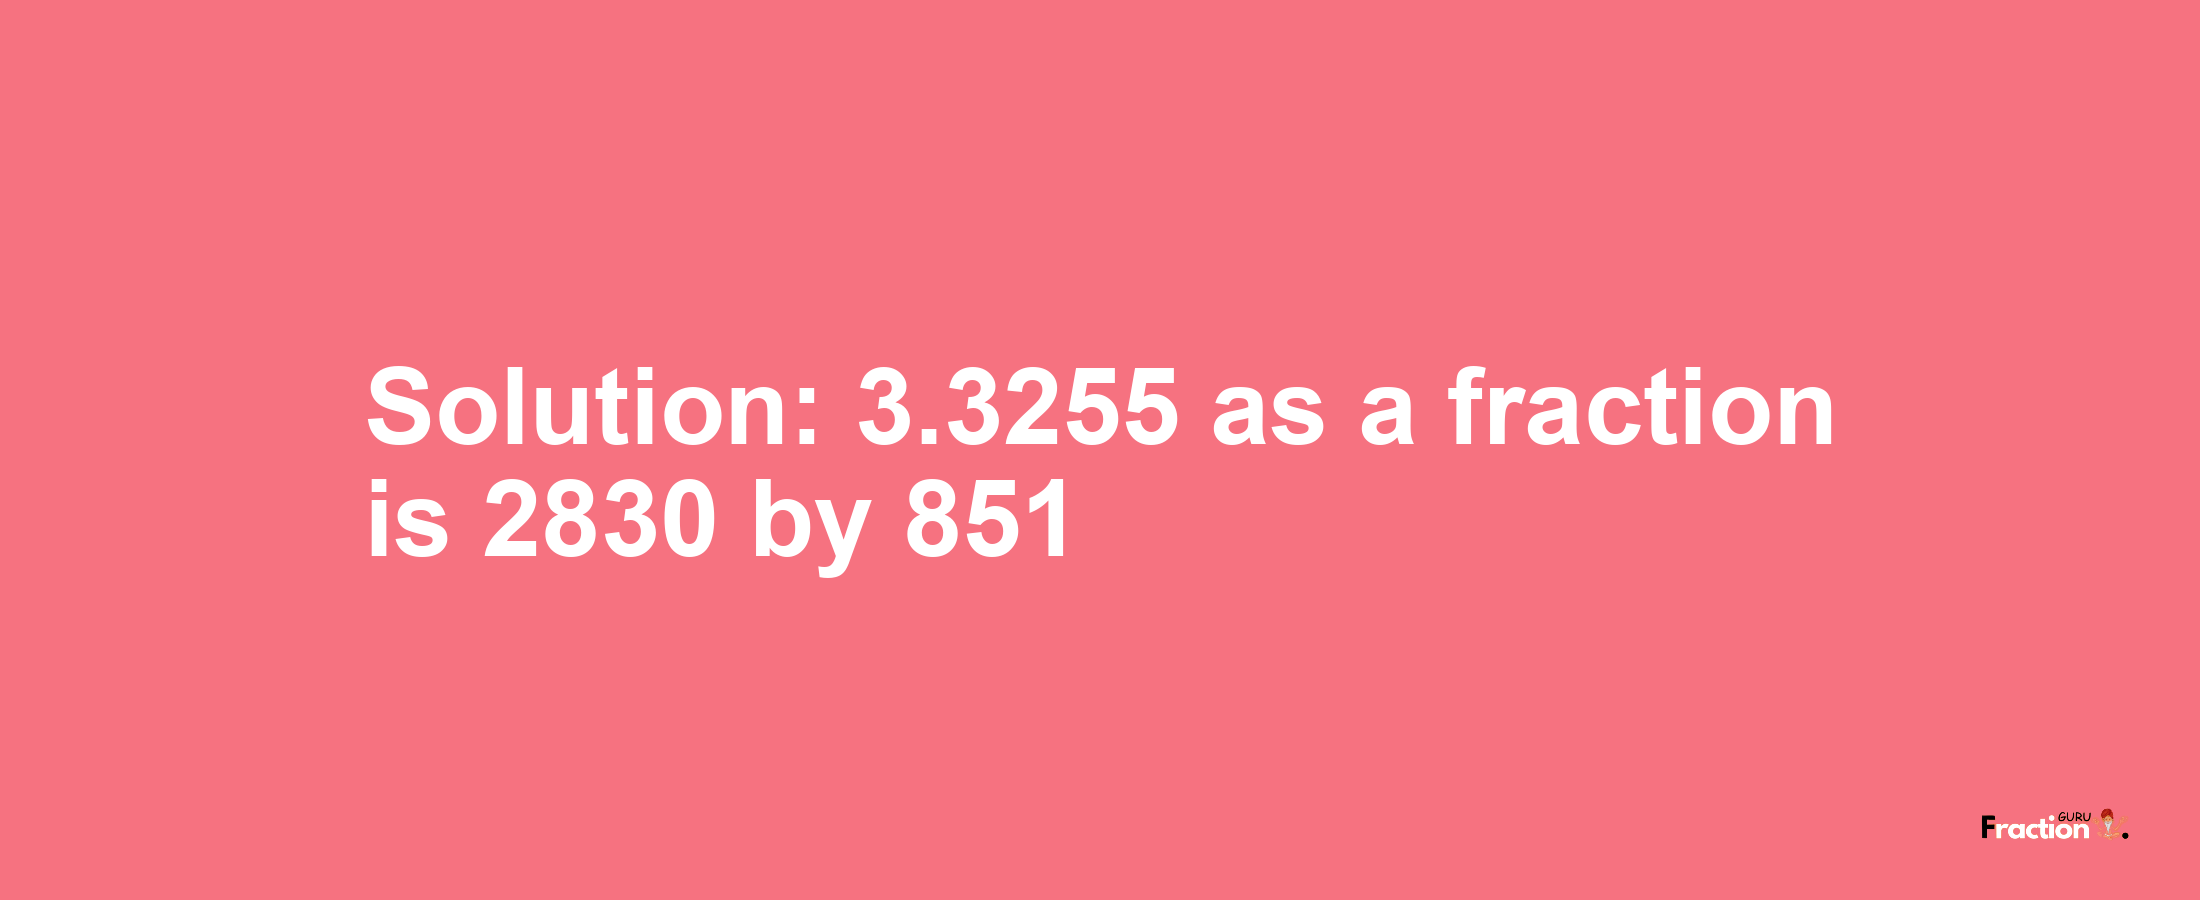 Solution:3.3255 as a fraction is 2830/851